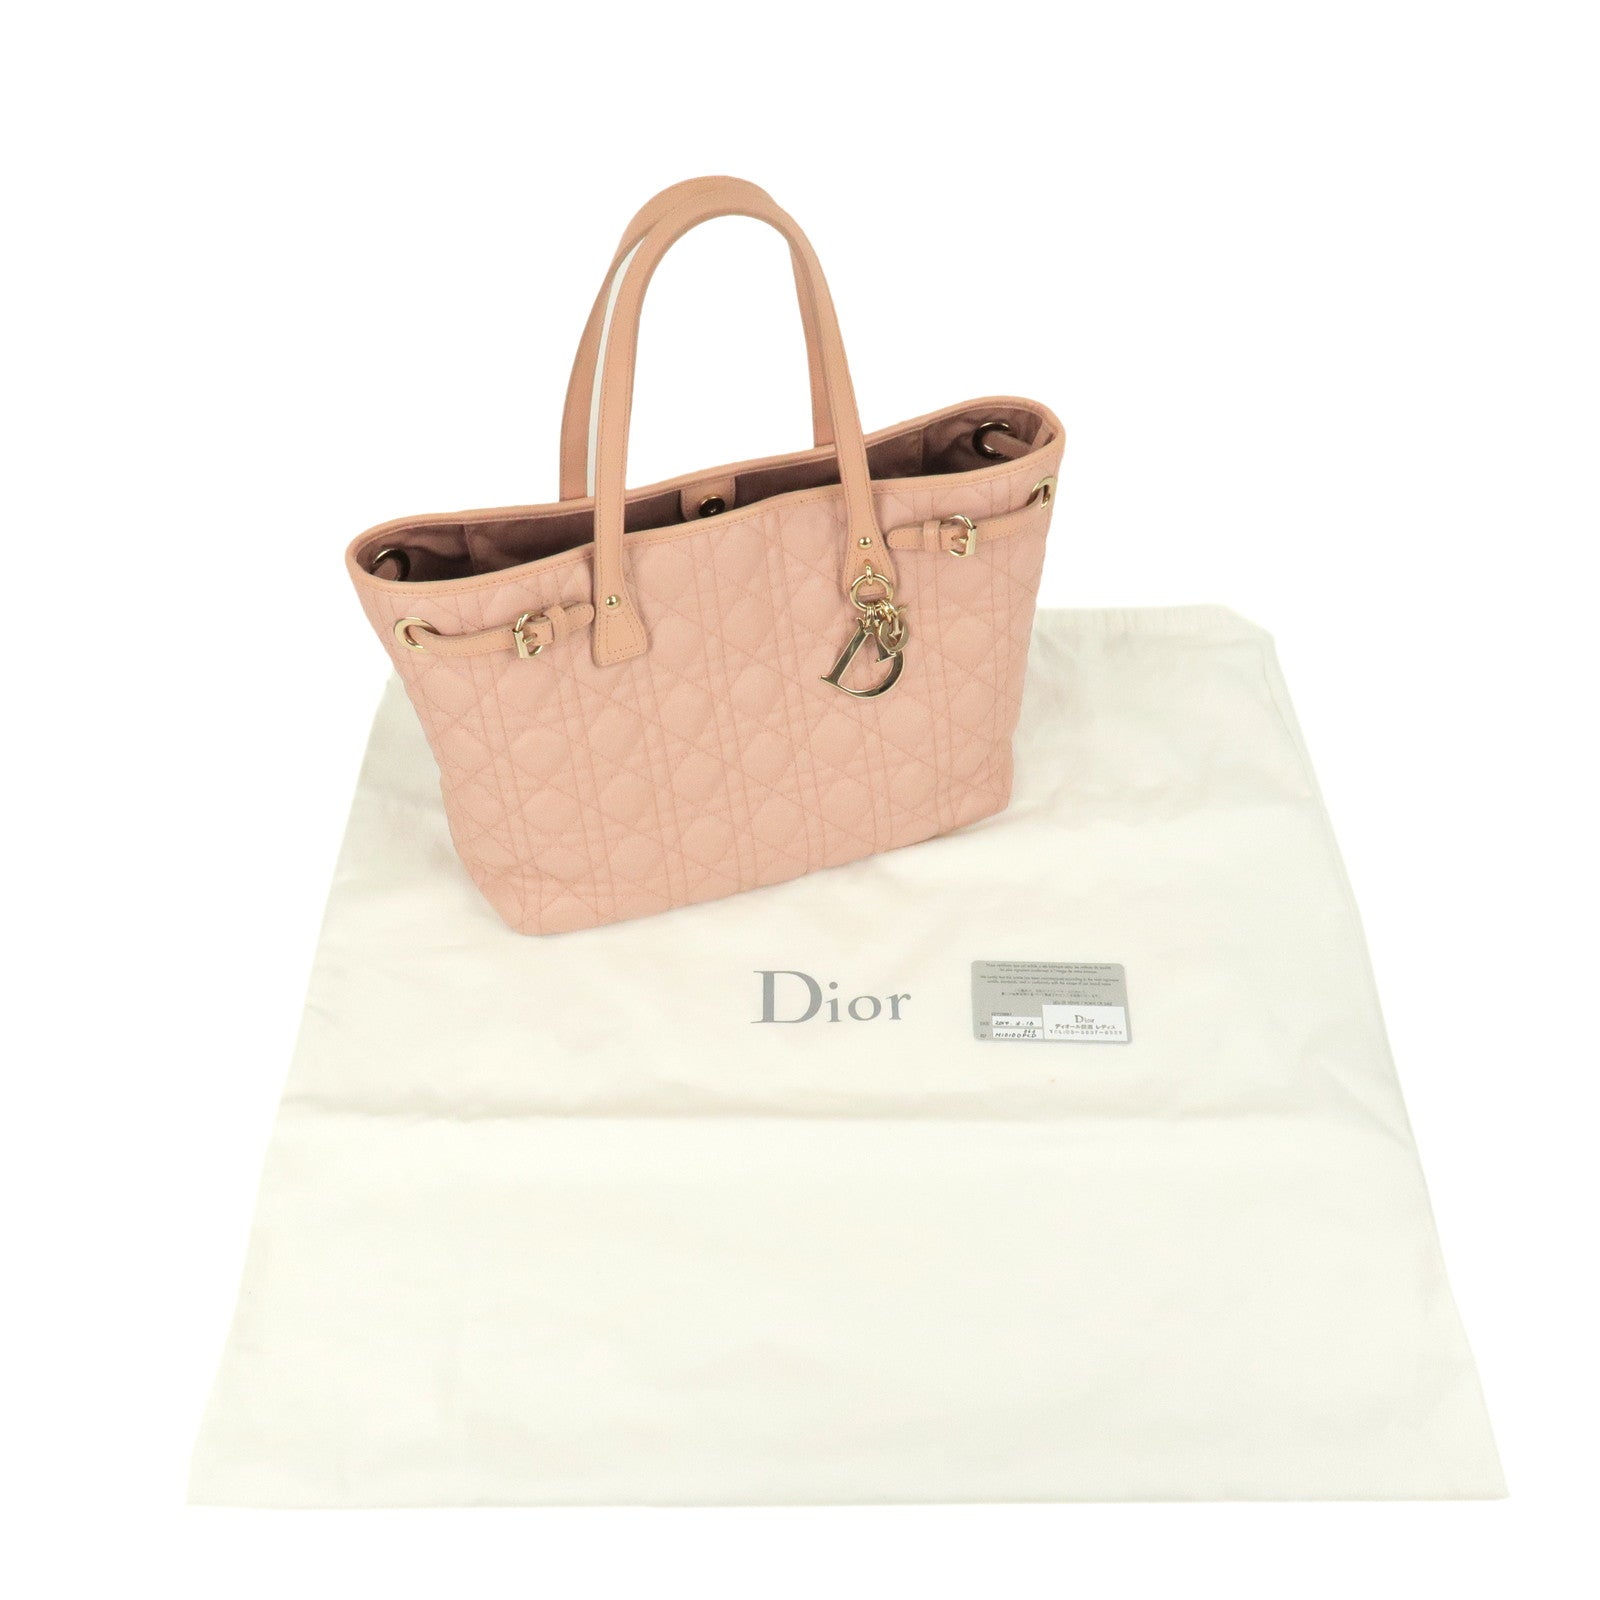 Tote - Dior - Panarea - Canvas - Christian - neighborhood mil tote black -  Bag - Cannage - Pink – handbag tommy hilfiger poppy small tote corp -  Leather